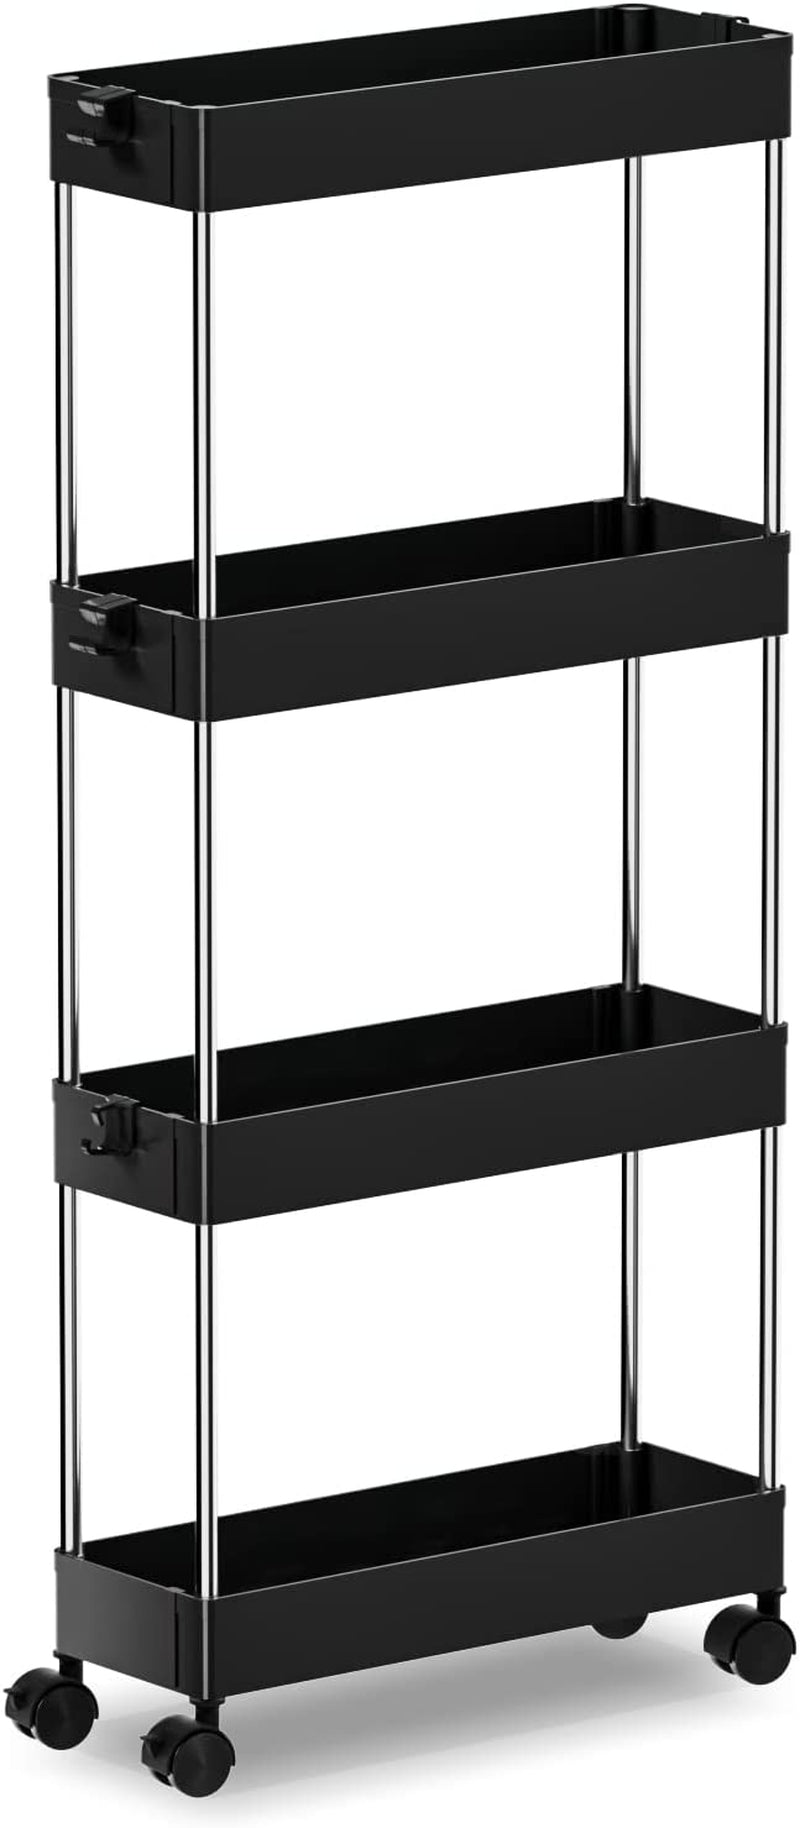 OTK Slim Storage Cart 3 Tier Mobile Shelving Unit Organizer, Utility Rolling Shelf Cart with Wheels for Bathroom Kitchen Bedroom Office Laundry Narrow Places，White Home & Garden > Household Supplies > Storage & Organization OTK 4 Tier-Black Slim 